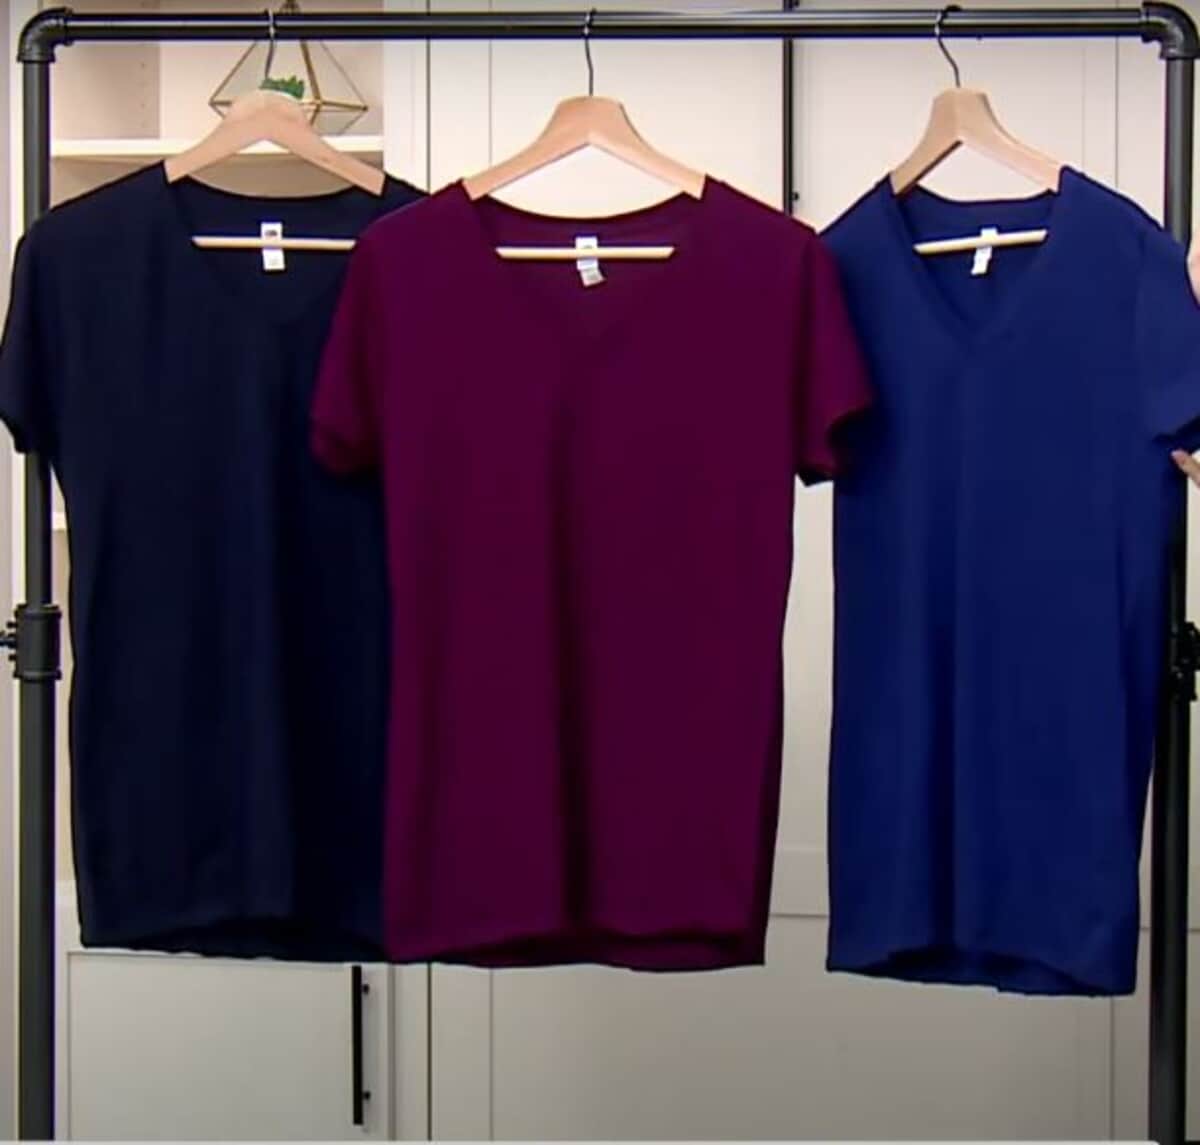 FRUIT OF THE LOOM Sofspun V-Neck T-shirts - Blue, Plum, Navy - M (Delivers in 14-20 Business Days) image number 1